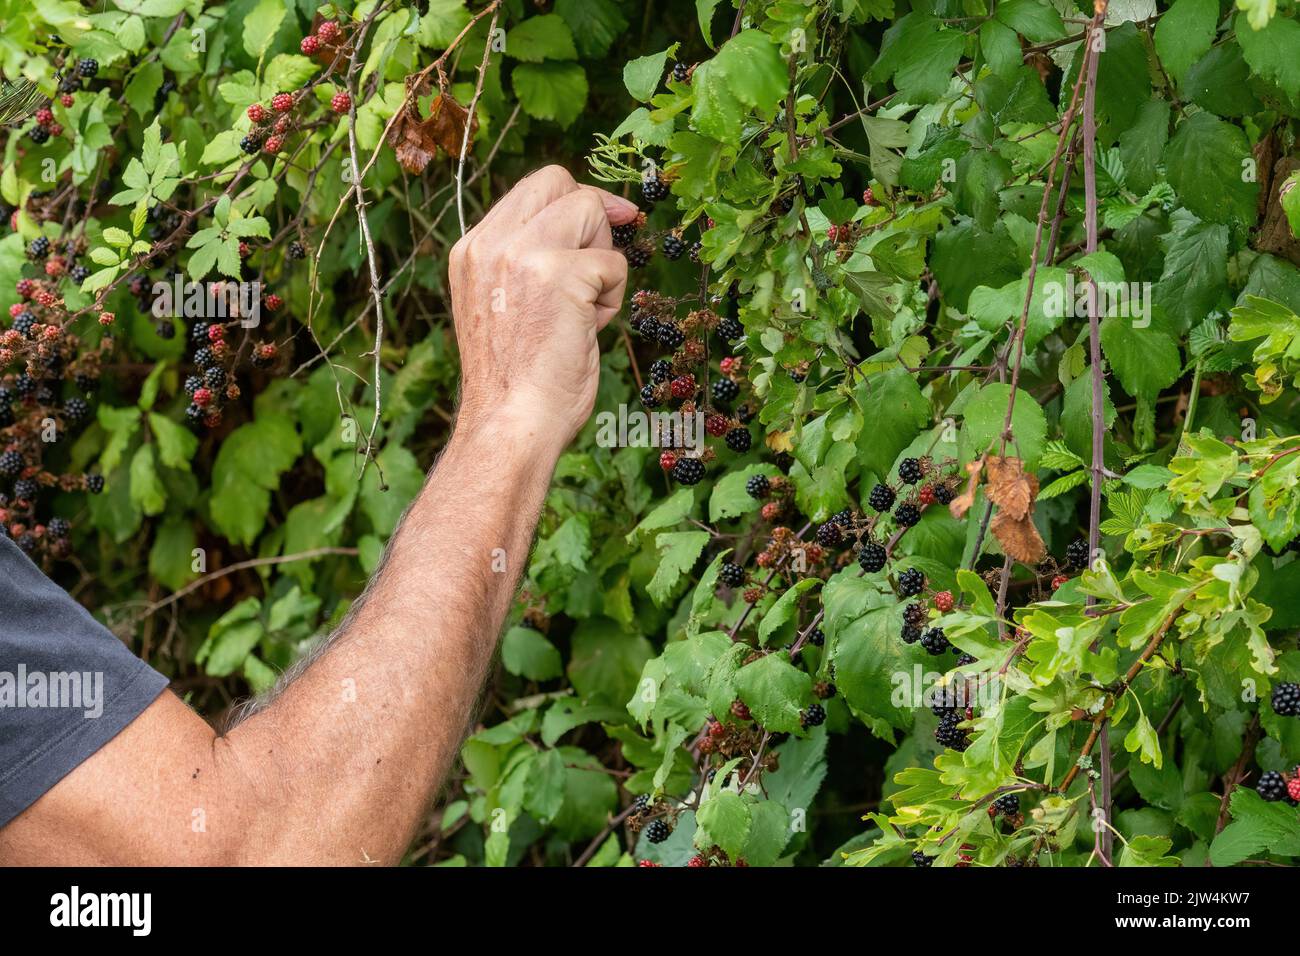 Man picking blackberries from bramble bush during late summer early autumn, England, UK, foraging fruit in the countryside Stock Photo